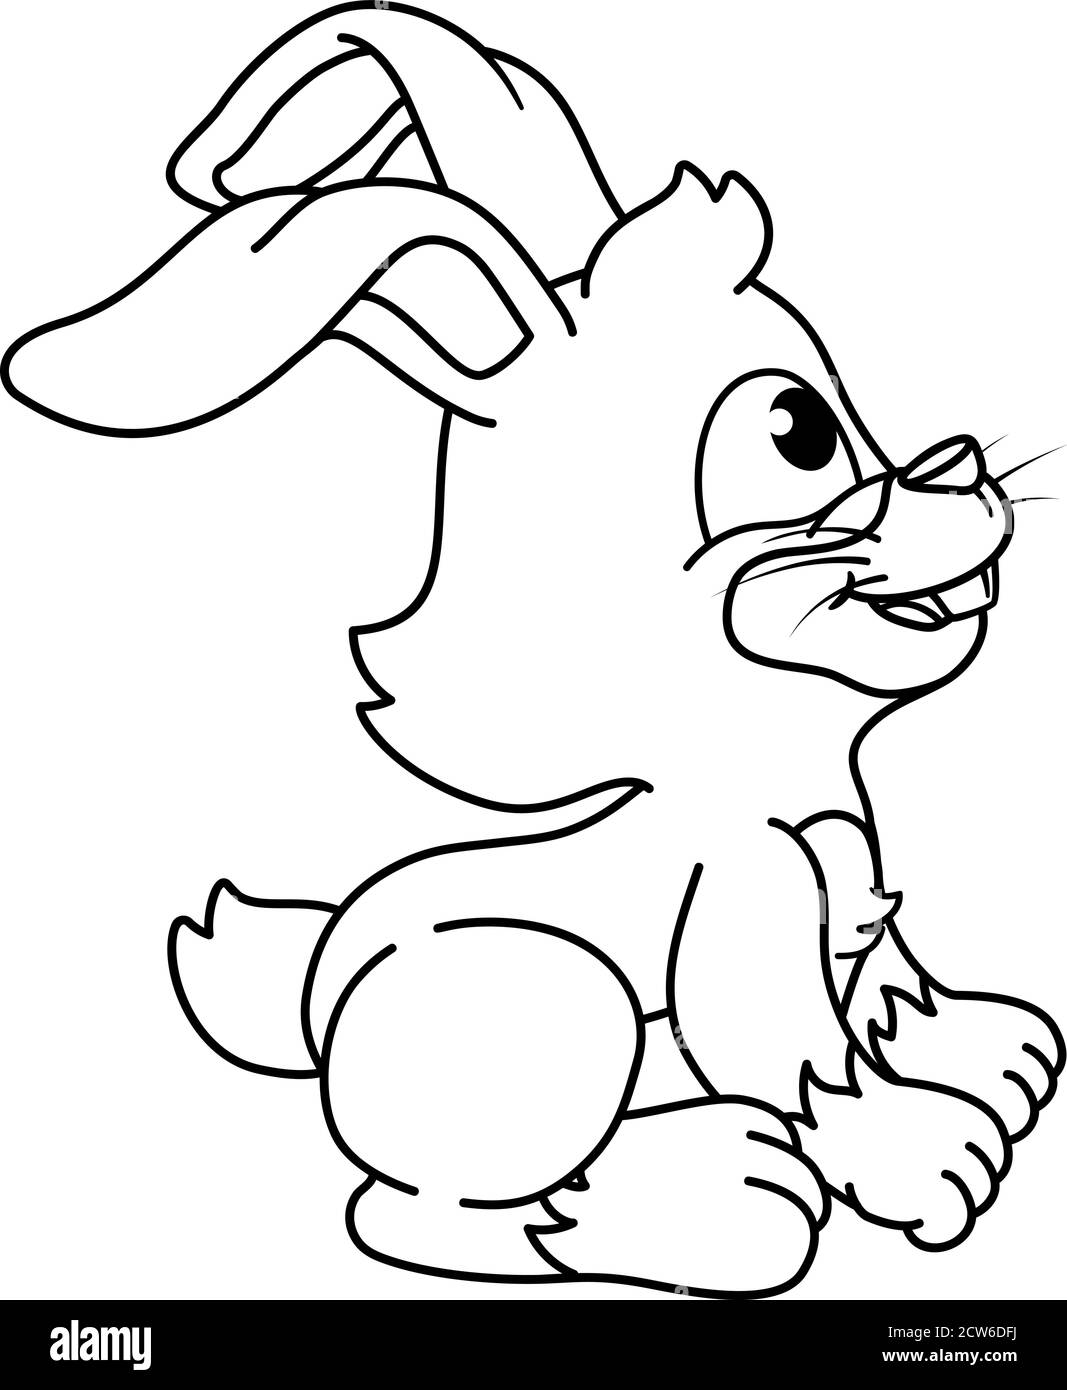 Easter Bunny Coloring Book Black and White Cartoon Stock Vector